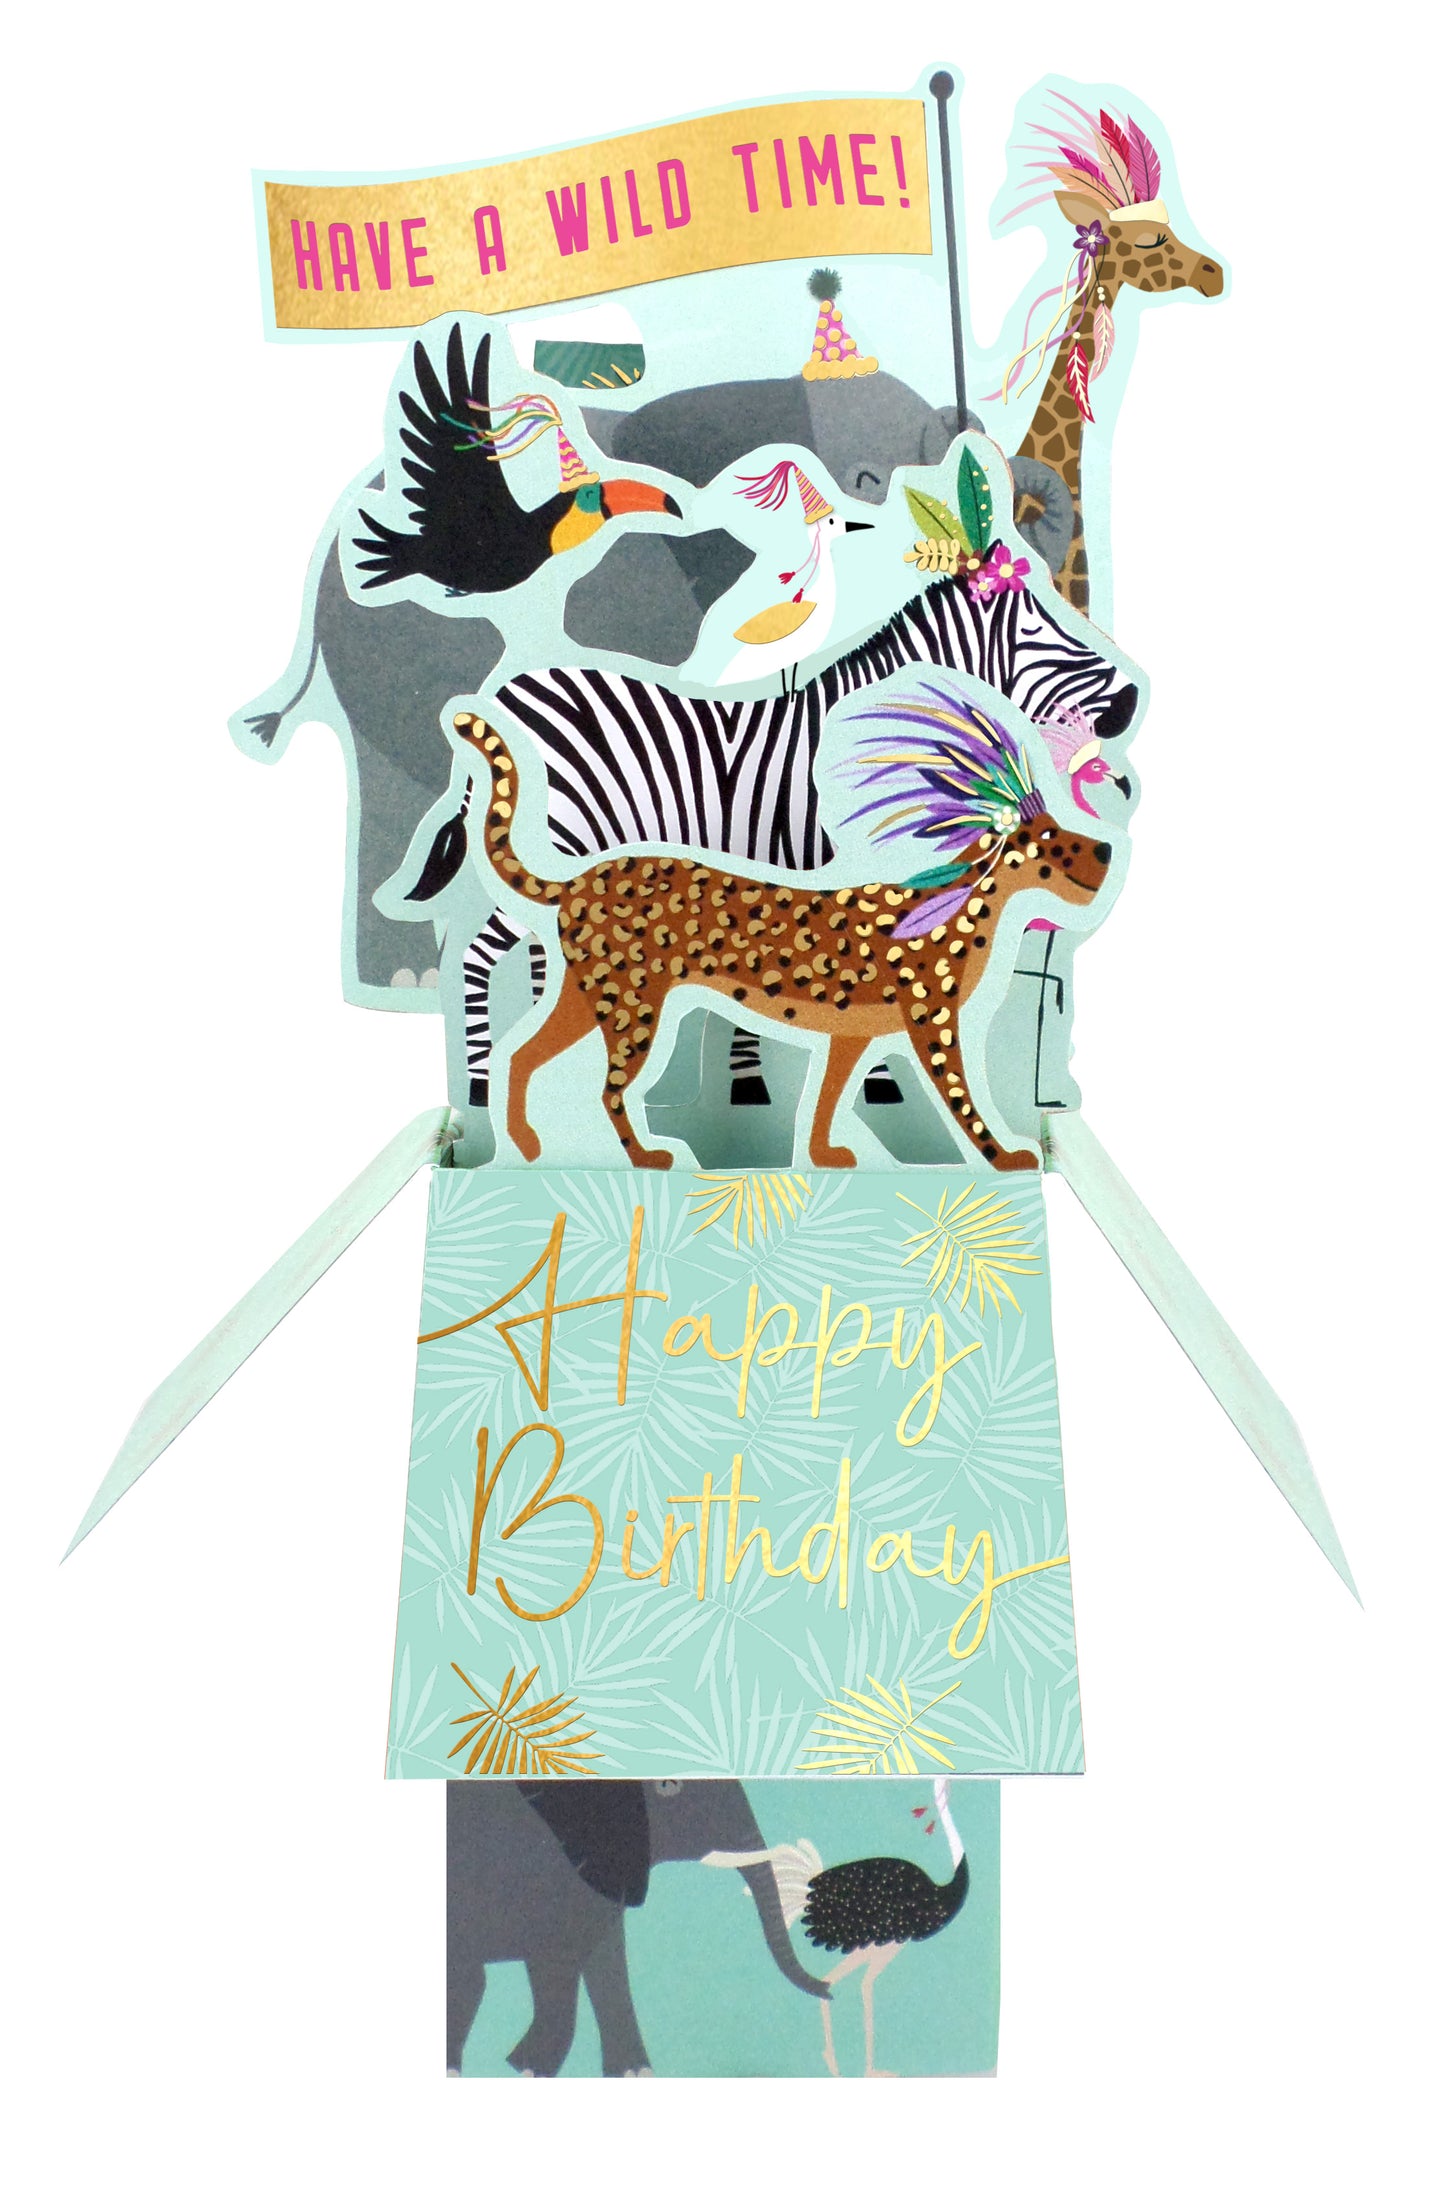 Clever Cube Have A Wild Time Party Animals Galore! Birthday Pop Up Greeting Card